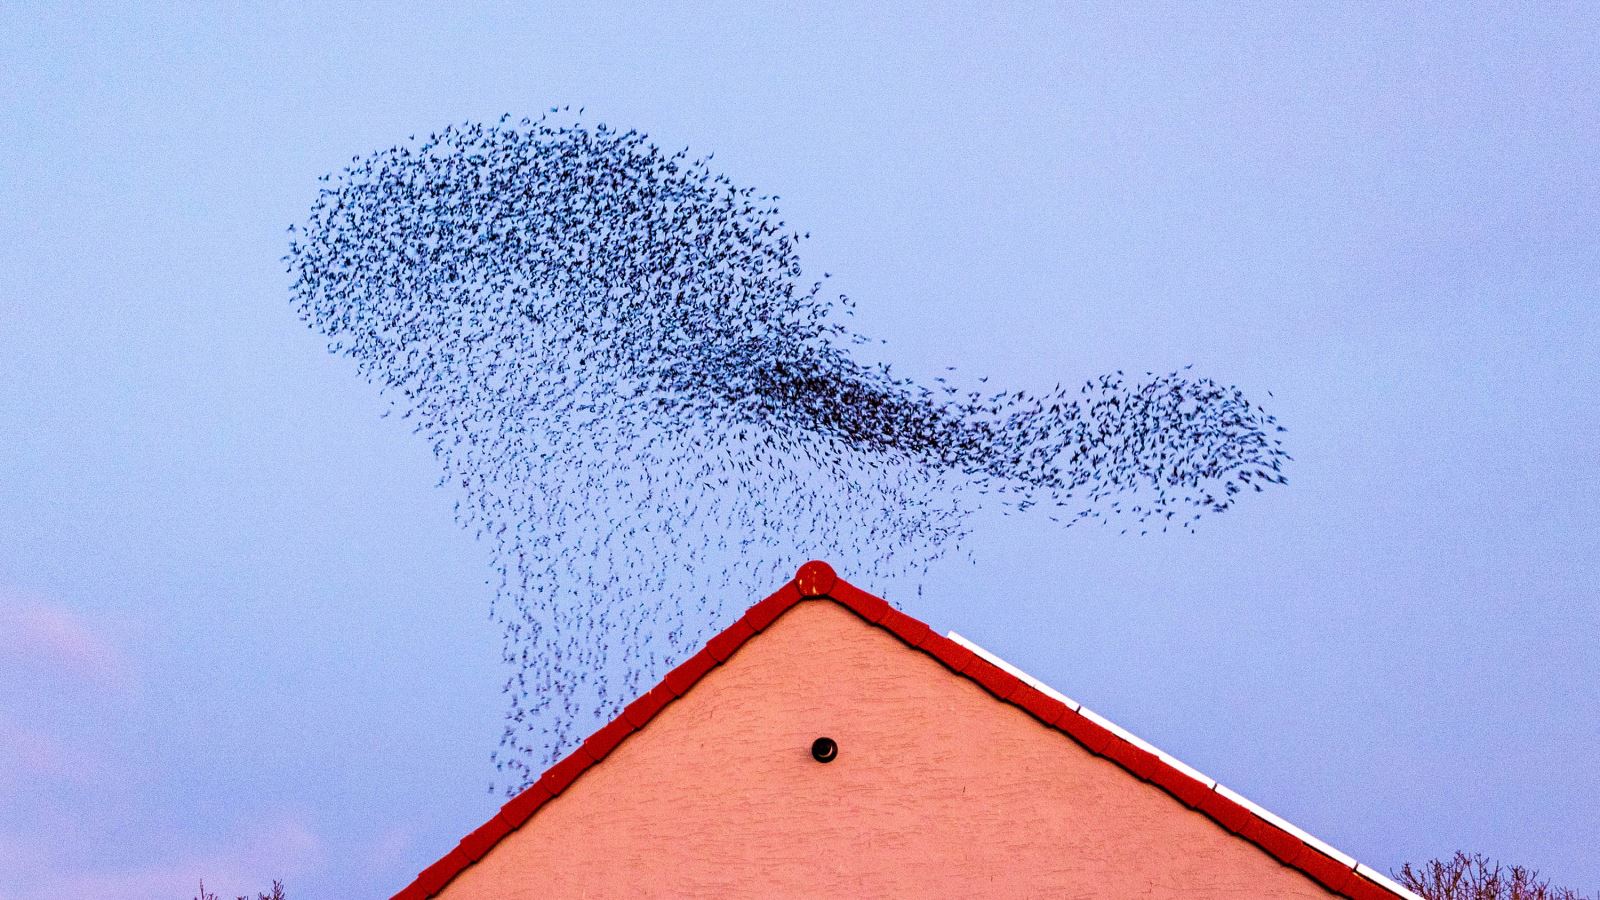 Starlings over a house